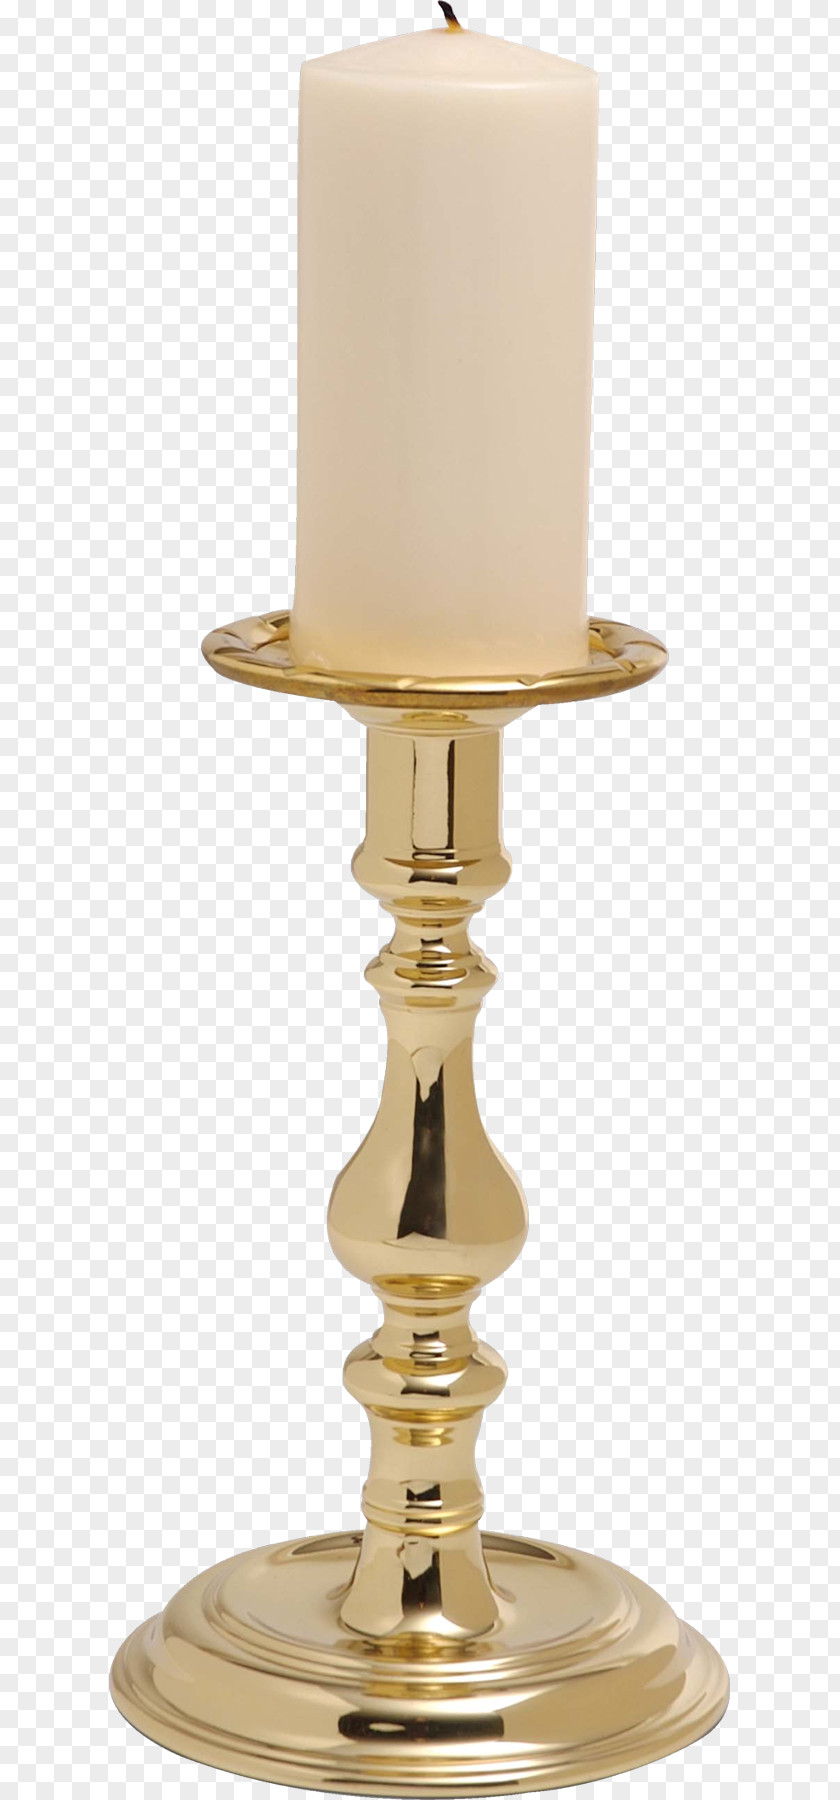 Candles Candlestick Table Tealight Glass PNG